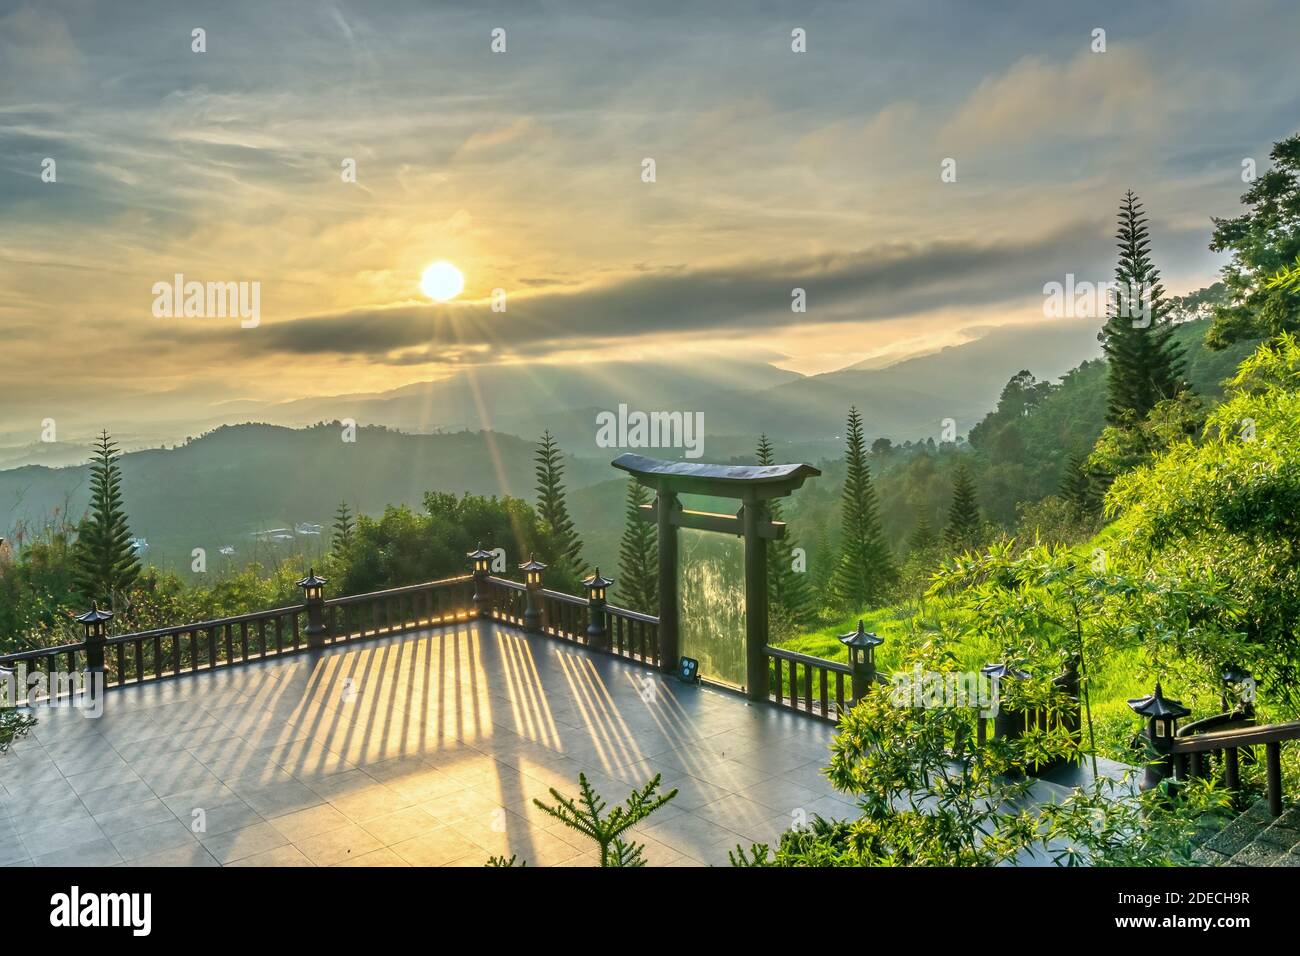 The magical sunrays of dawn next to the lantern in front of the temple yard welcomes the beautiful new day Stock Photo